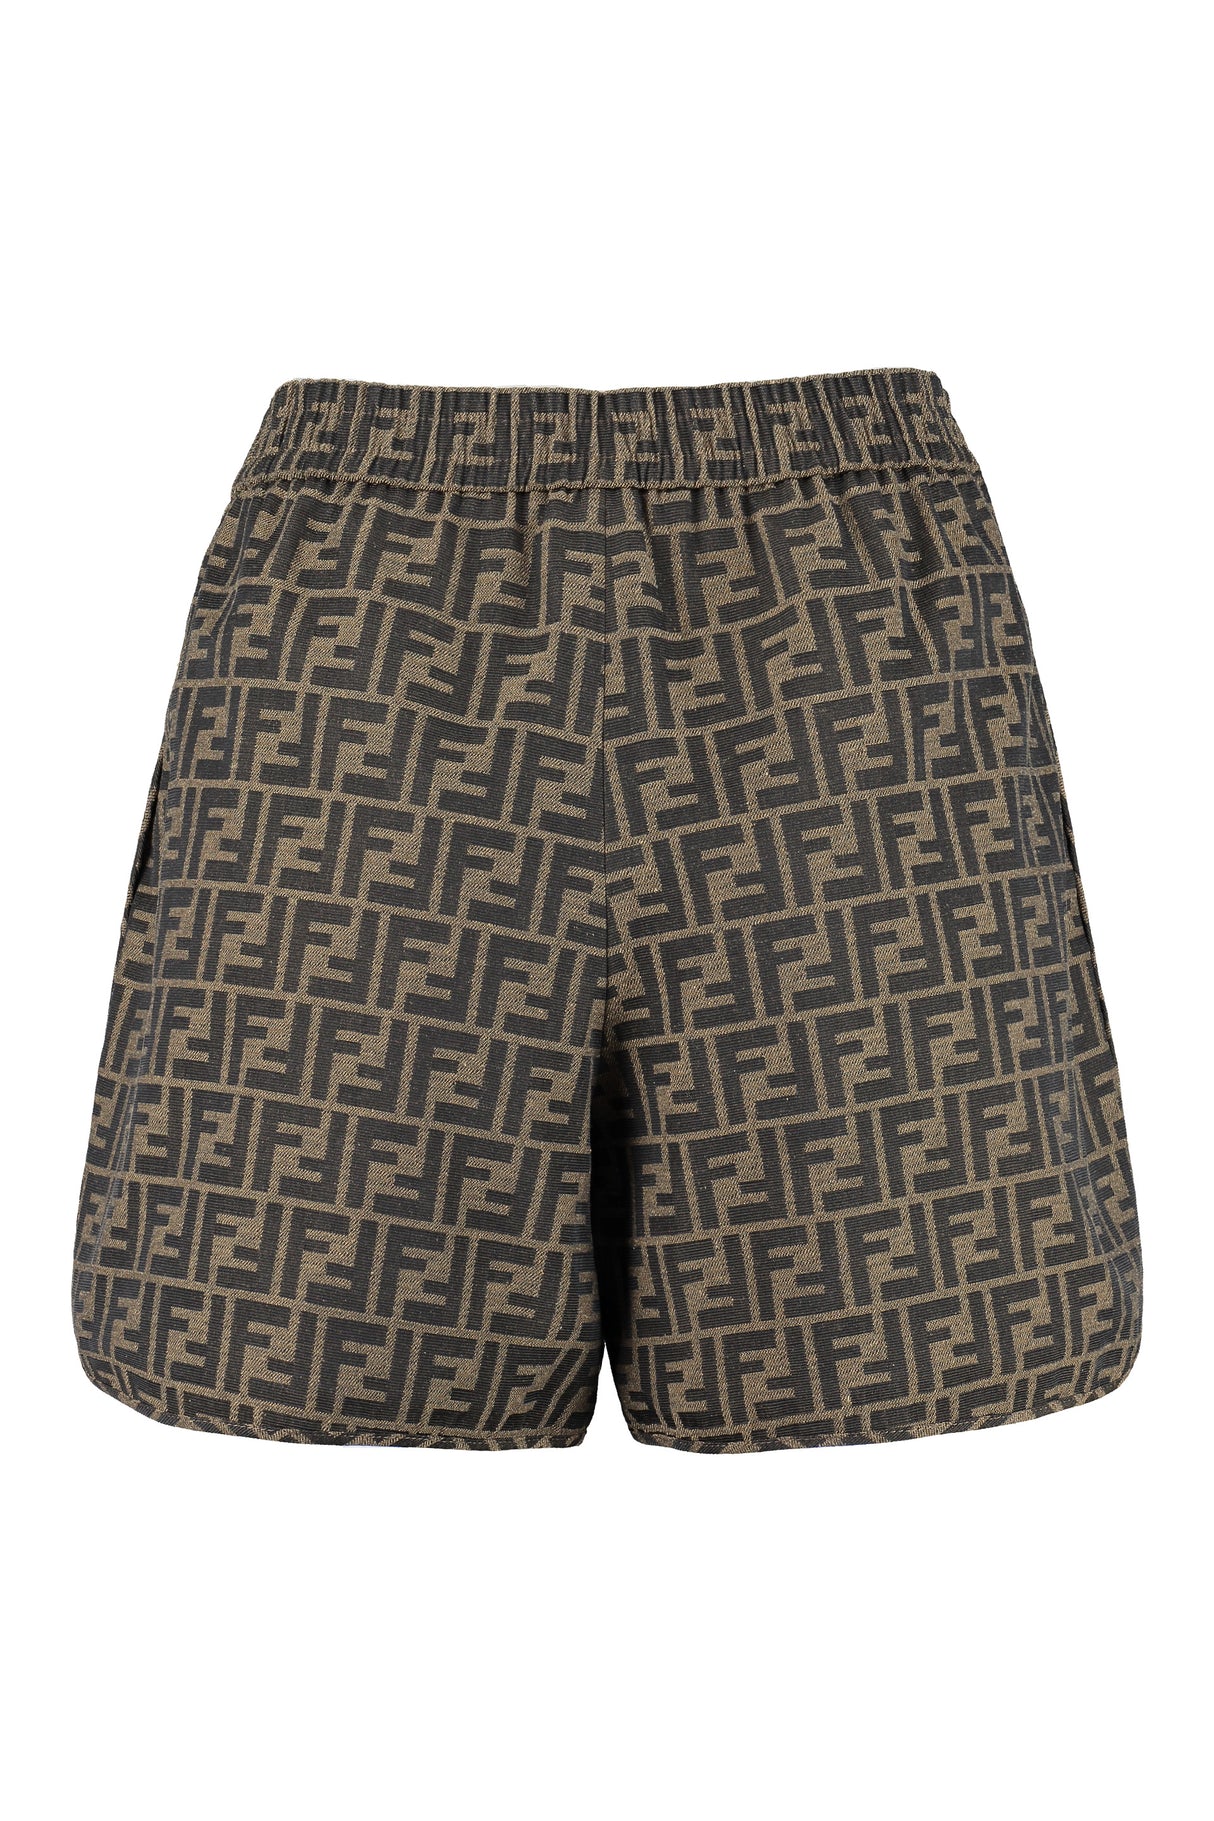 Luxurious Fendi Brown Leather Shorts for Women - SS24 Collection